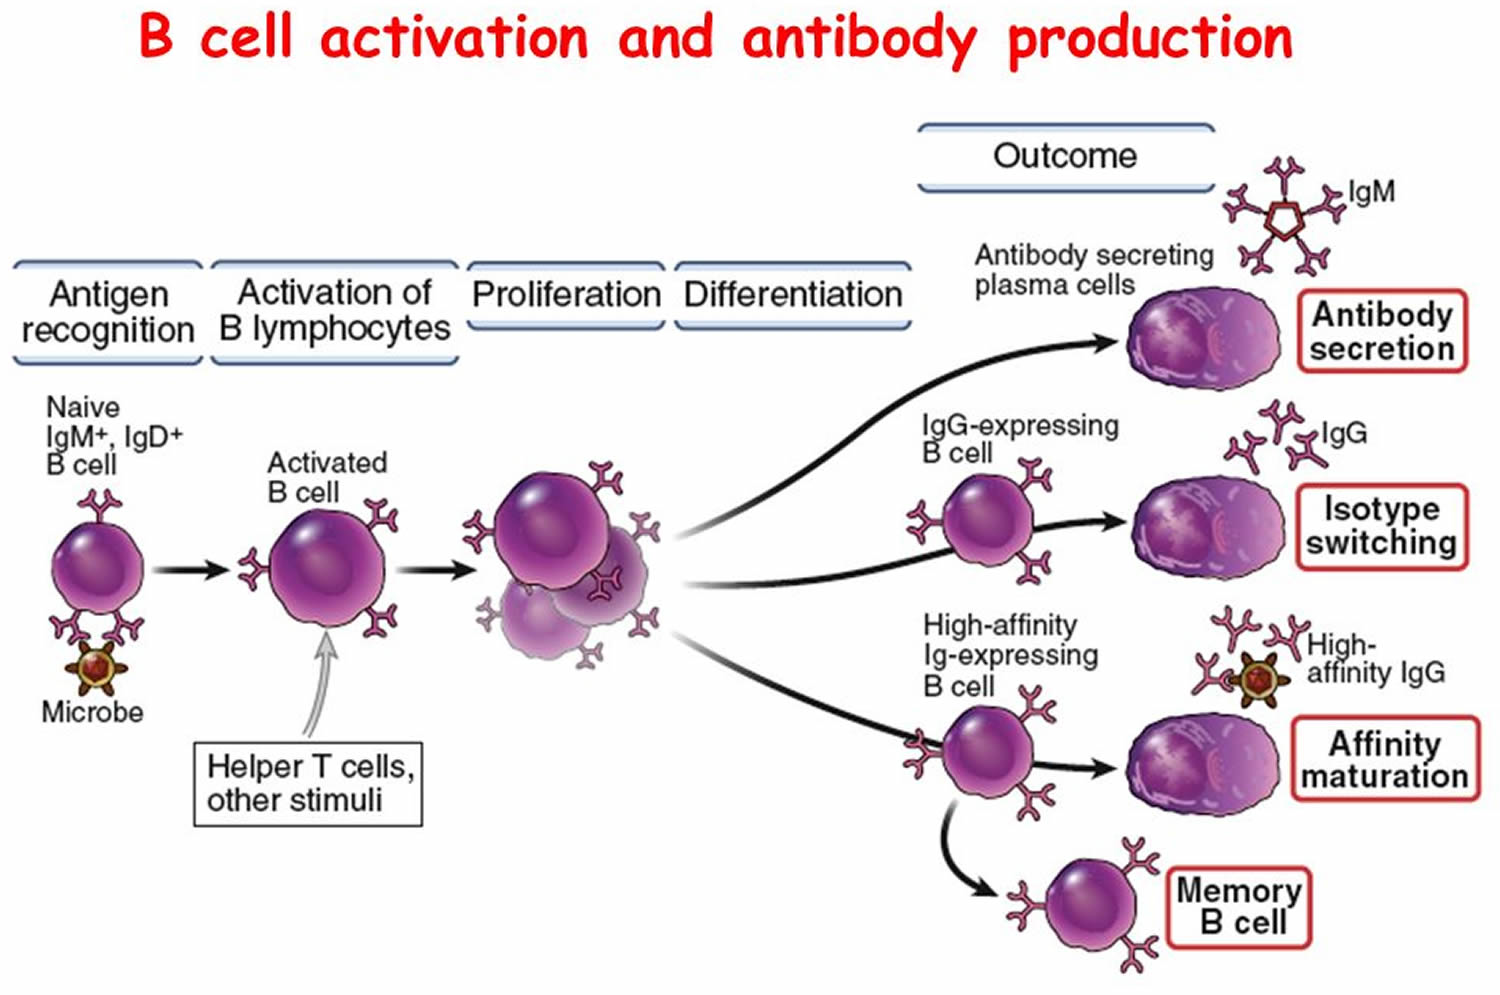 b-cell activation